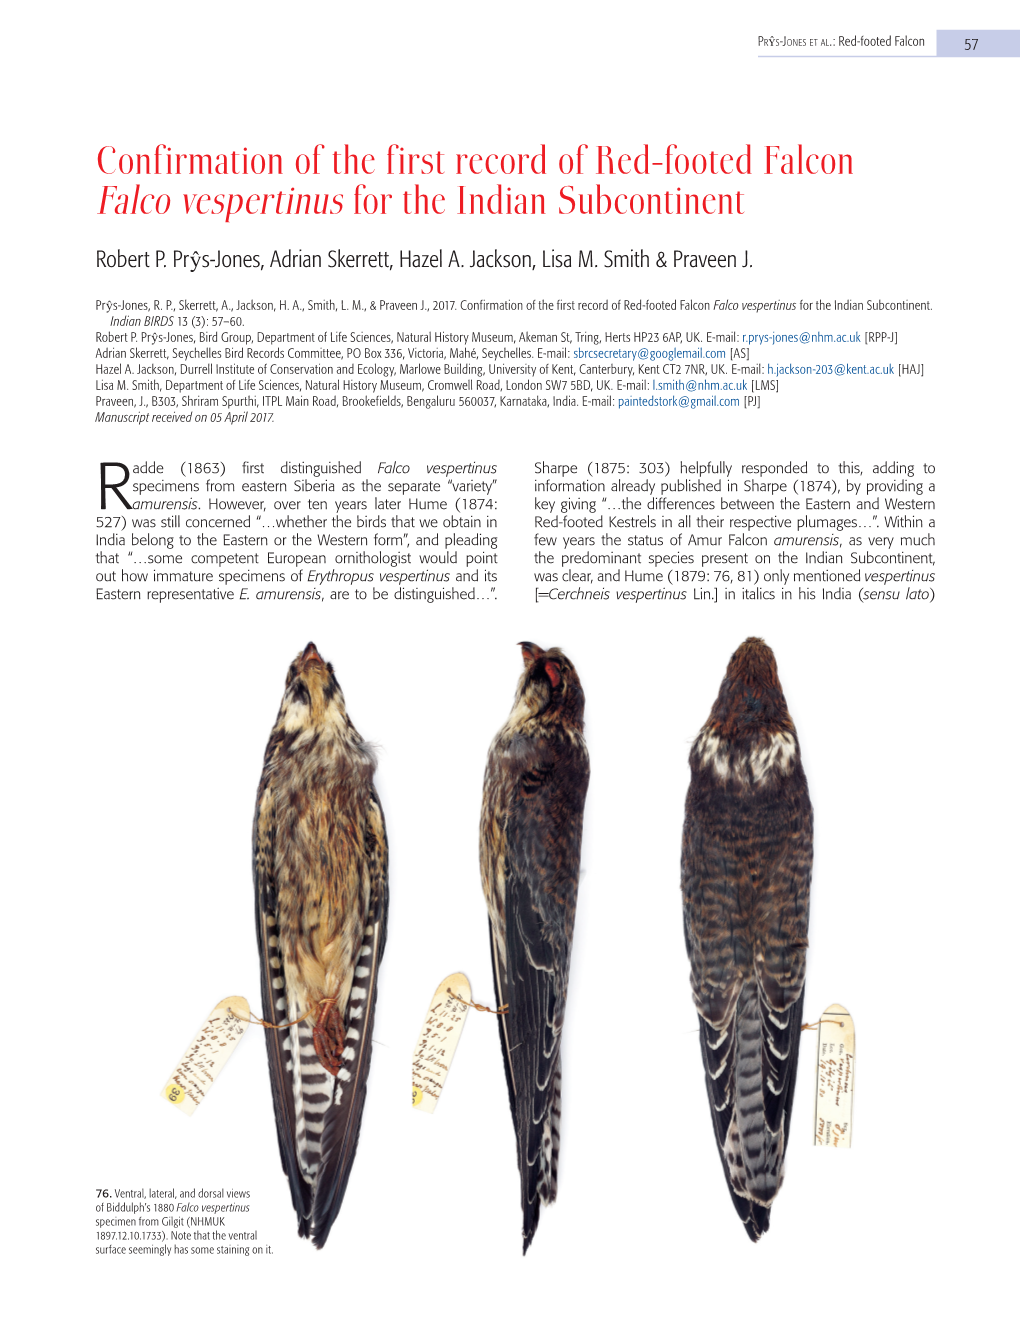 Confirmation of the First Record of Red-Footed Falcon Falco Vespertinus for the Indian Subcontinent